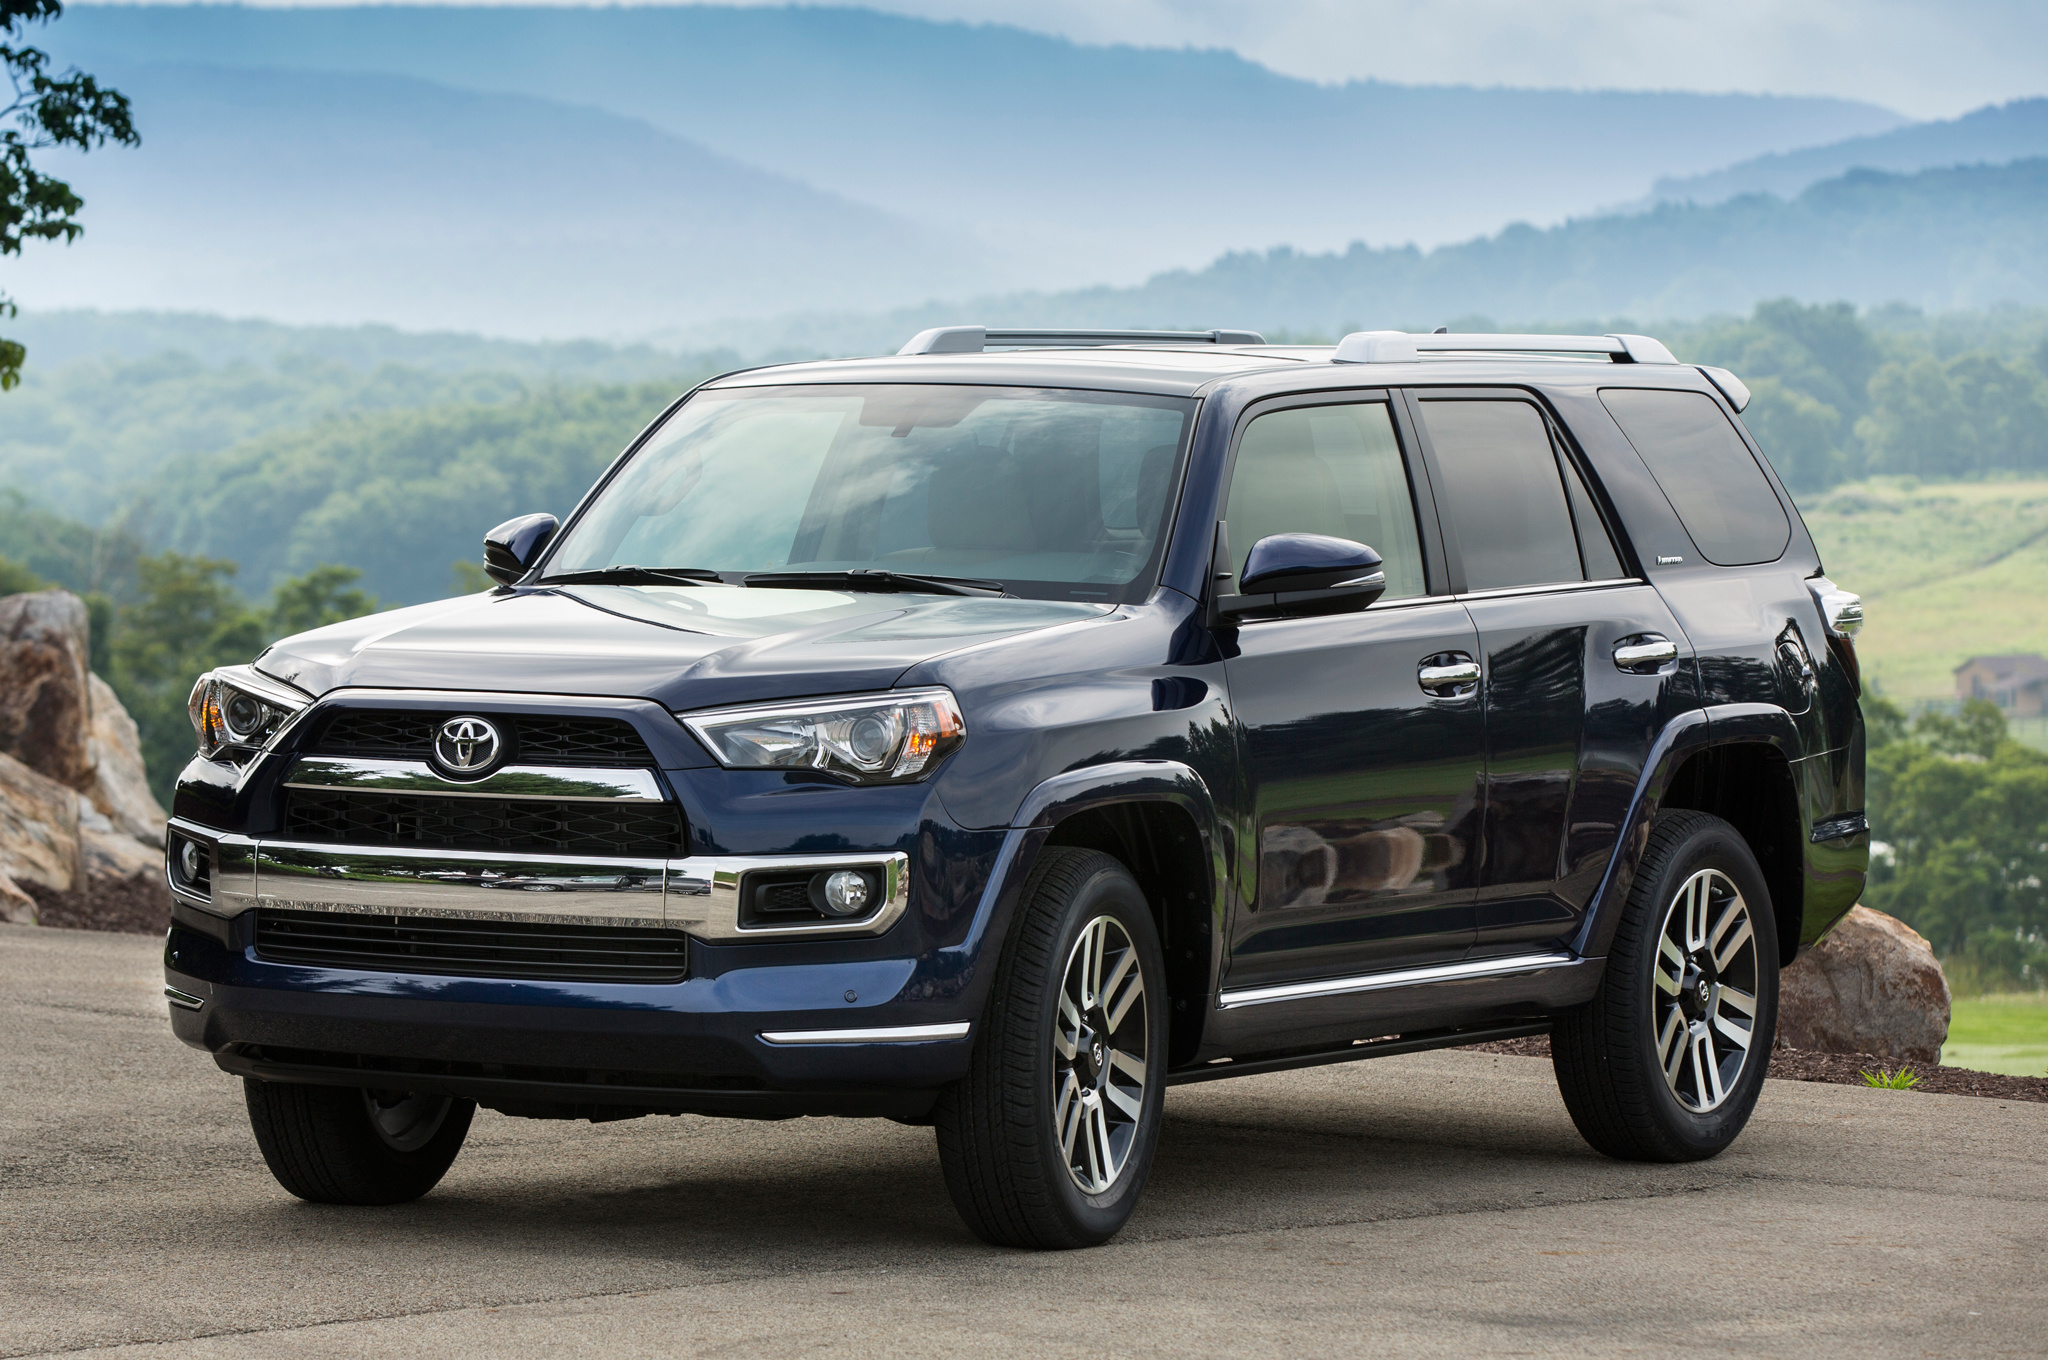 Toyota 4Runner, Specifications and details, Powerful SUV, Car enthusiast's dream, 2050x1360 HD Desktop